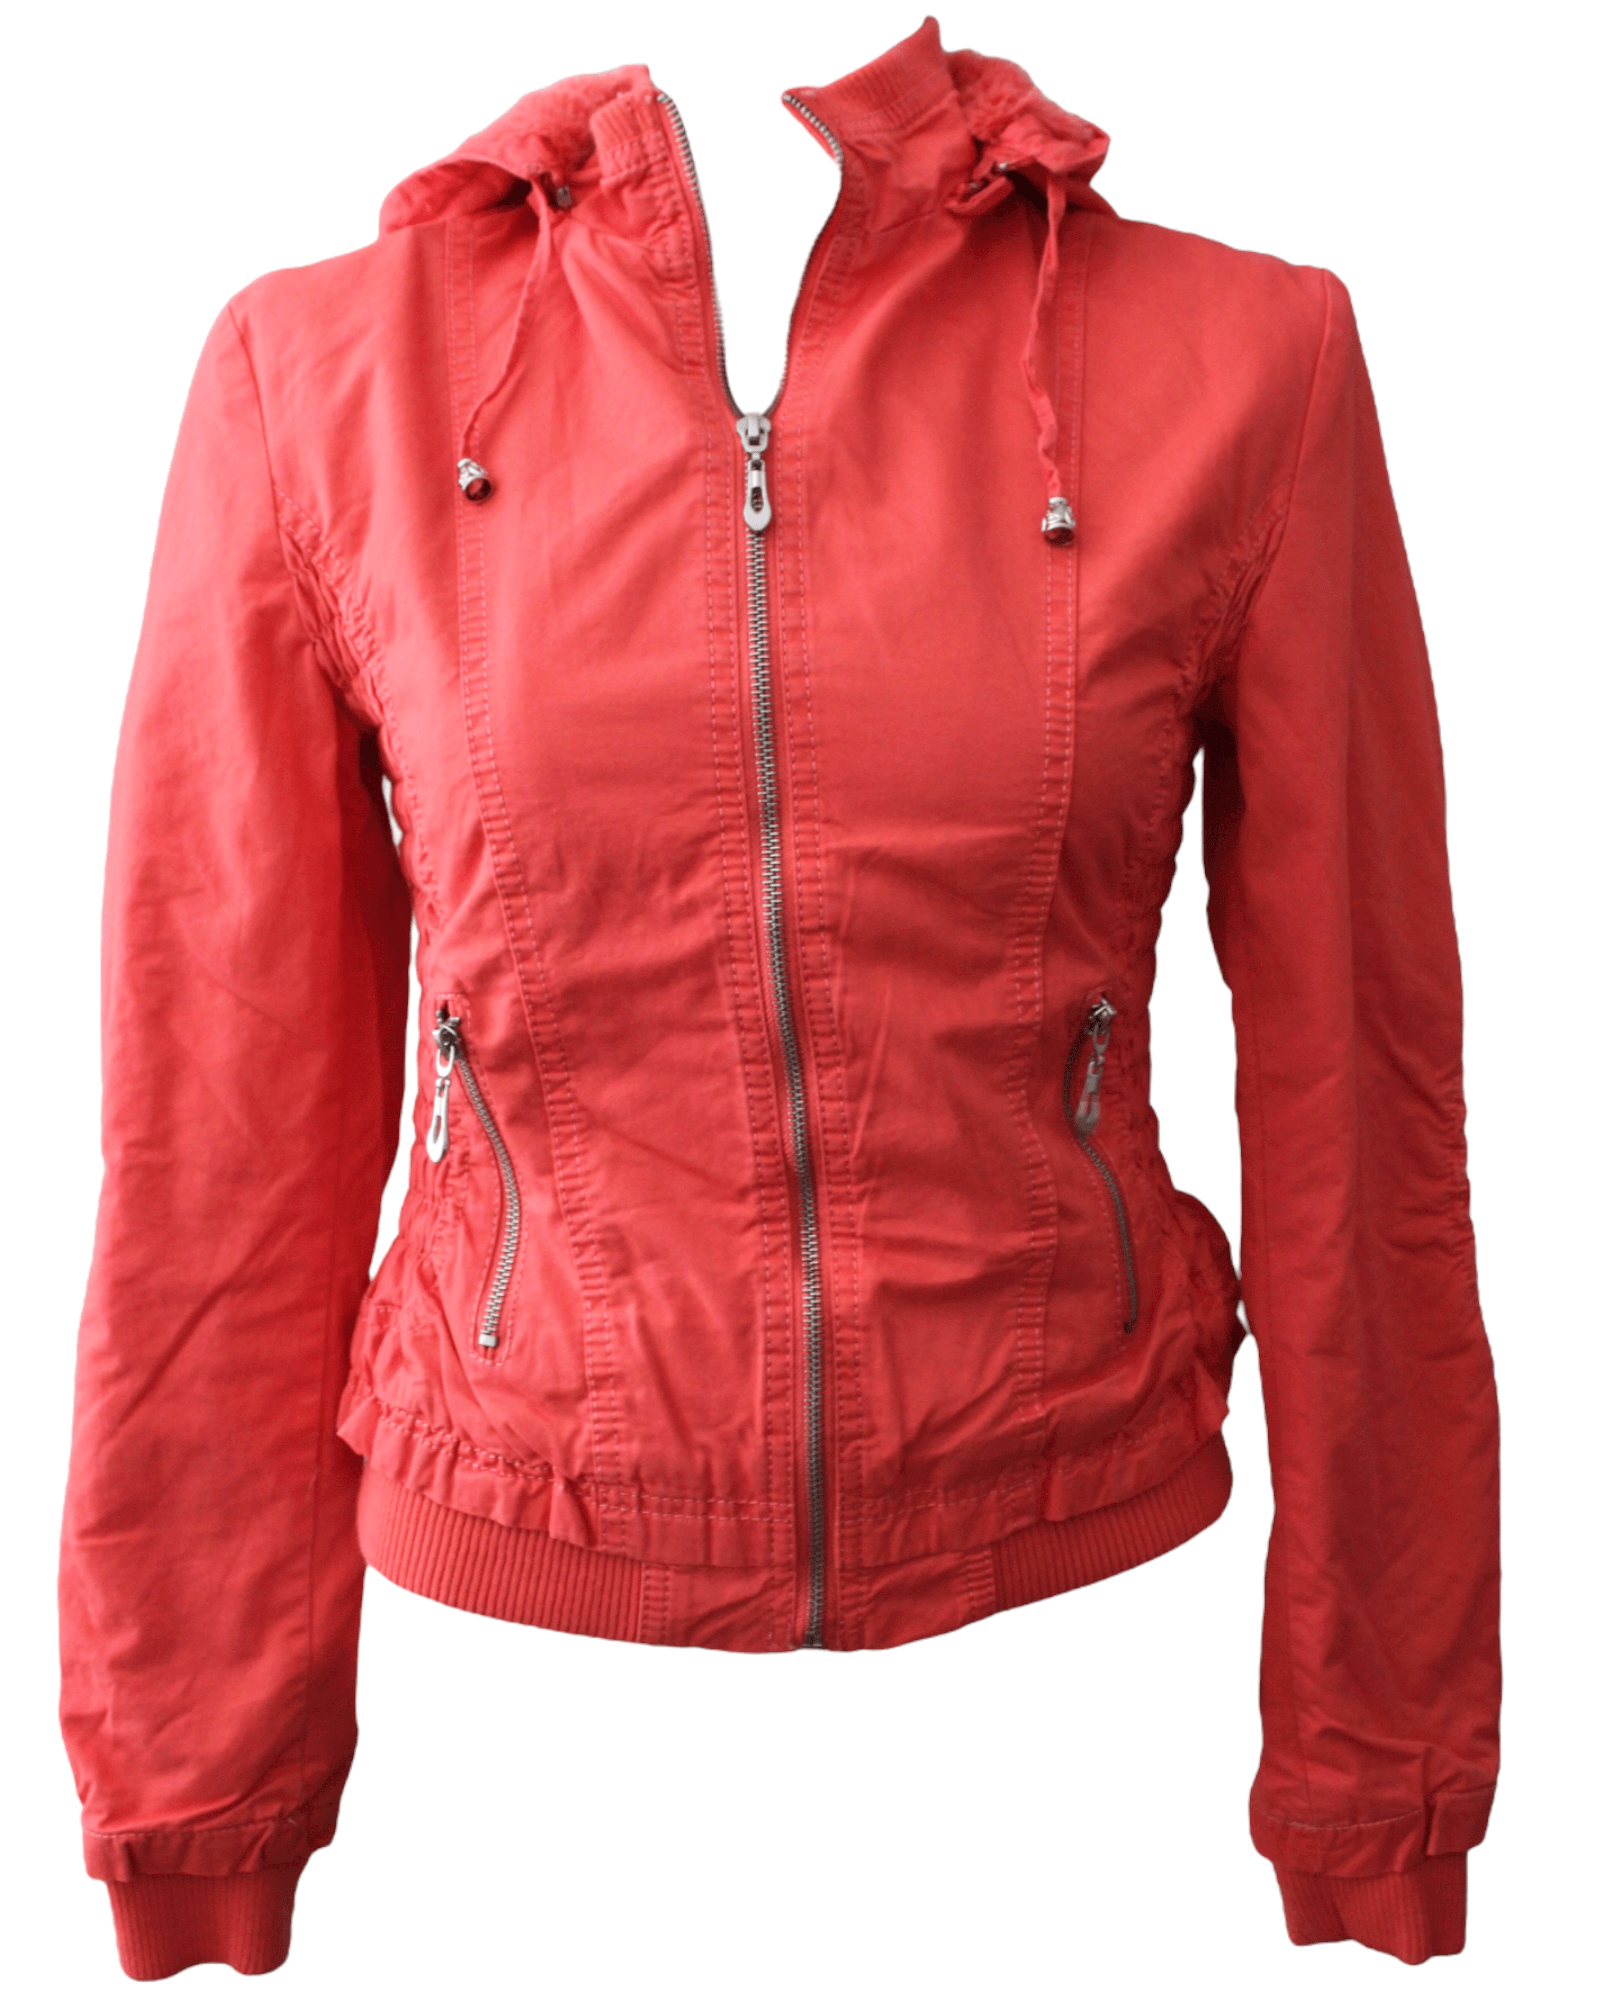 Warm Spring DOWNTOWN COALITION LA coral twill jacket